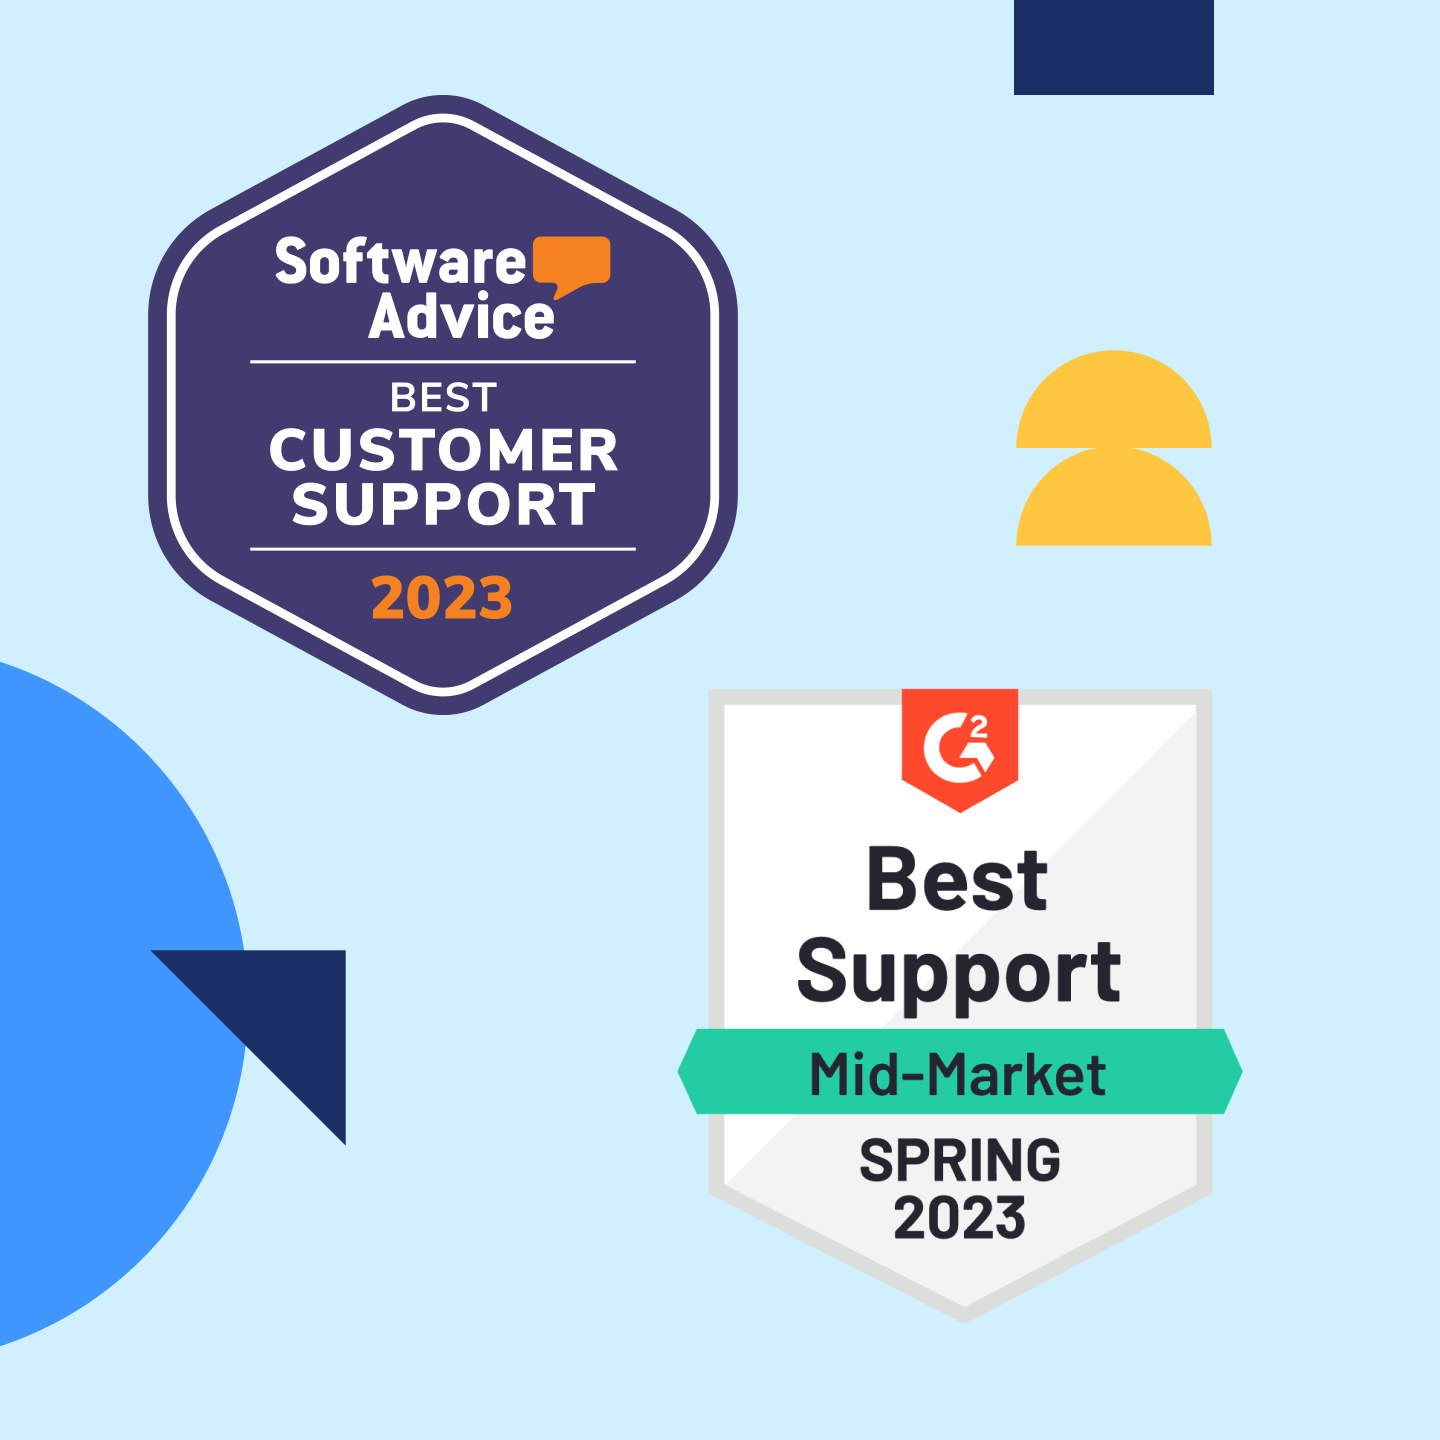 best customer support 2023 - Worksuite awarded by G2 and Software Advice